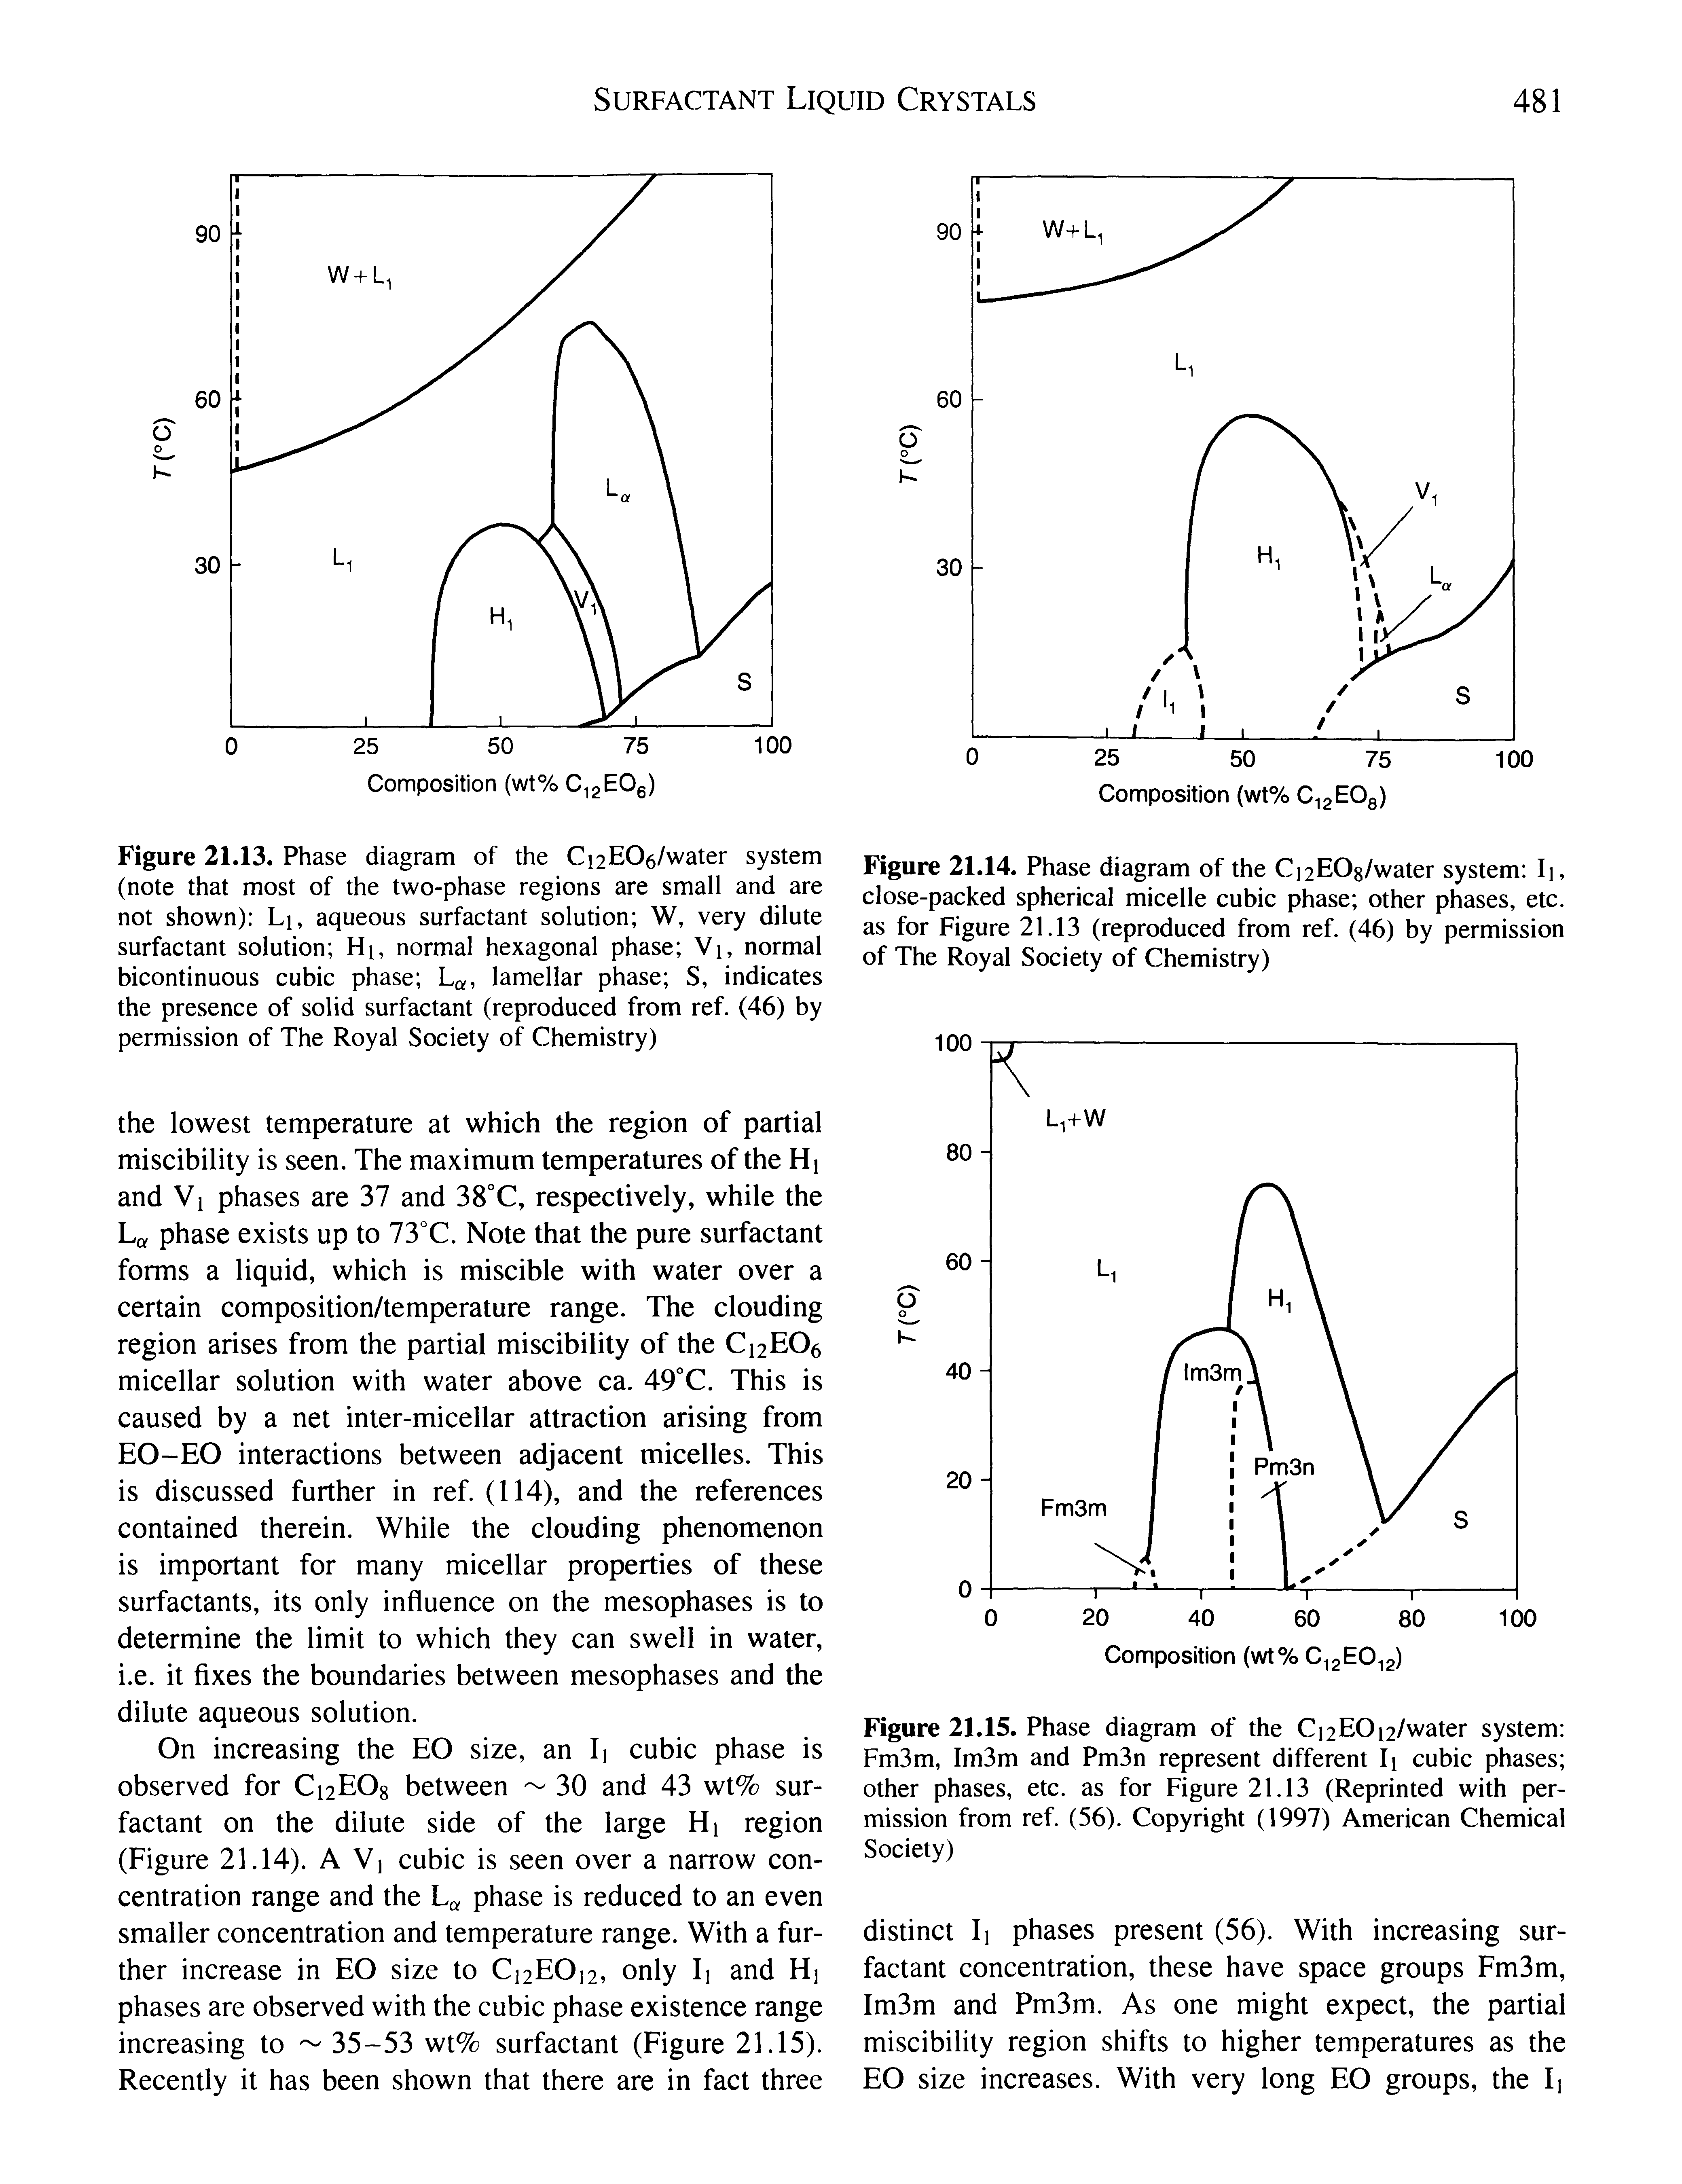 Figure 21.14. Phase diagram of the Ci2E08/water system Ii, close-packed spherical micelle cubic phase other phases, etc. as for Figure 21.13 (reproduced from ref. (46) by permission of The Royal Society of Chemistry)...